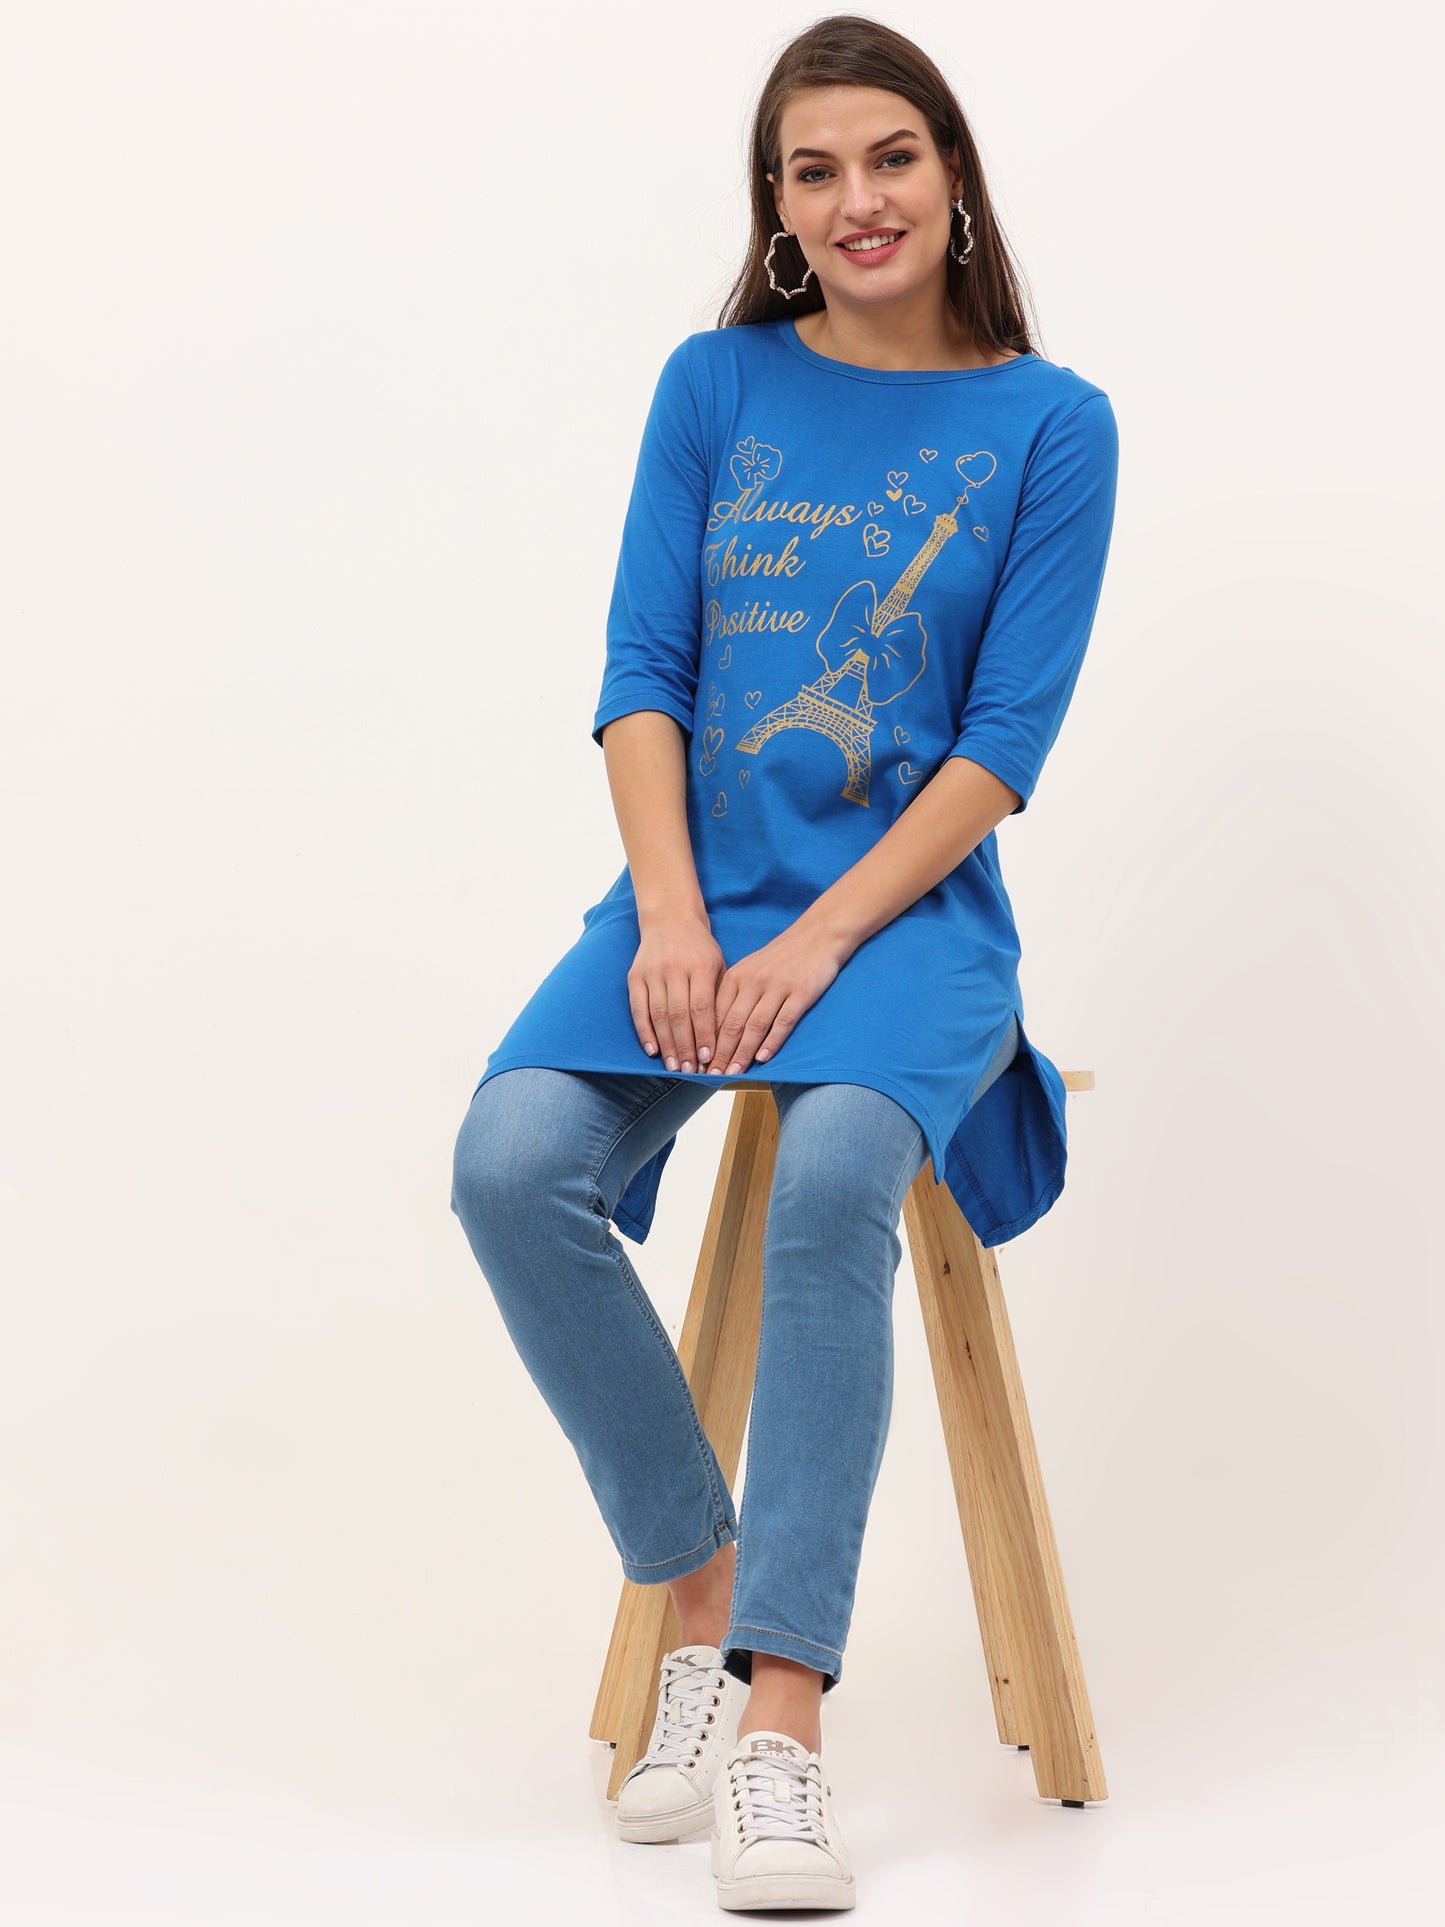 Women's Cotton Printed 3/4 Sleeve Royal Blue Color Long Top